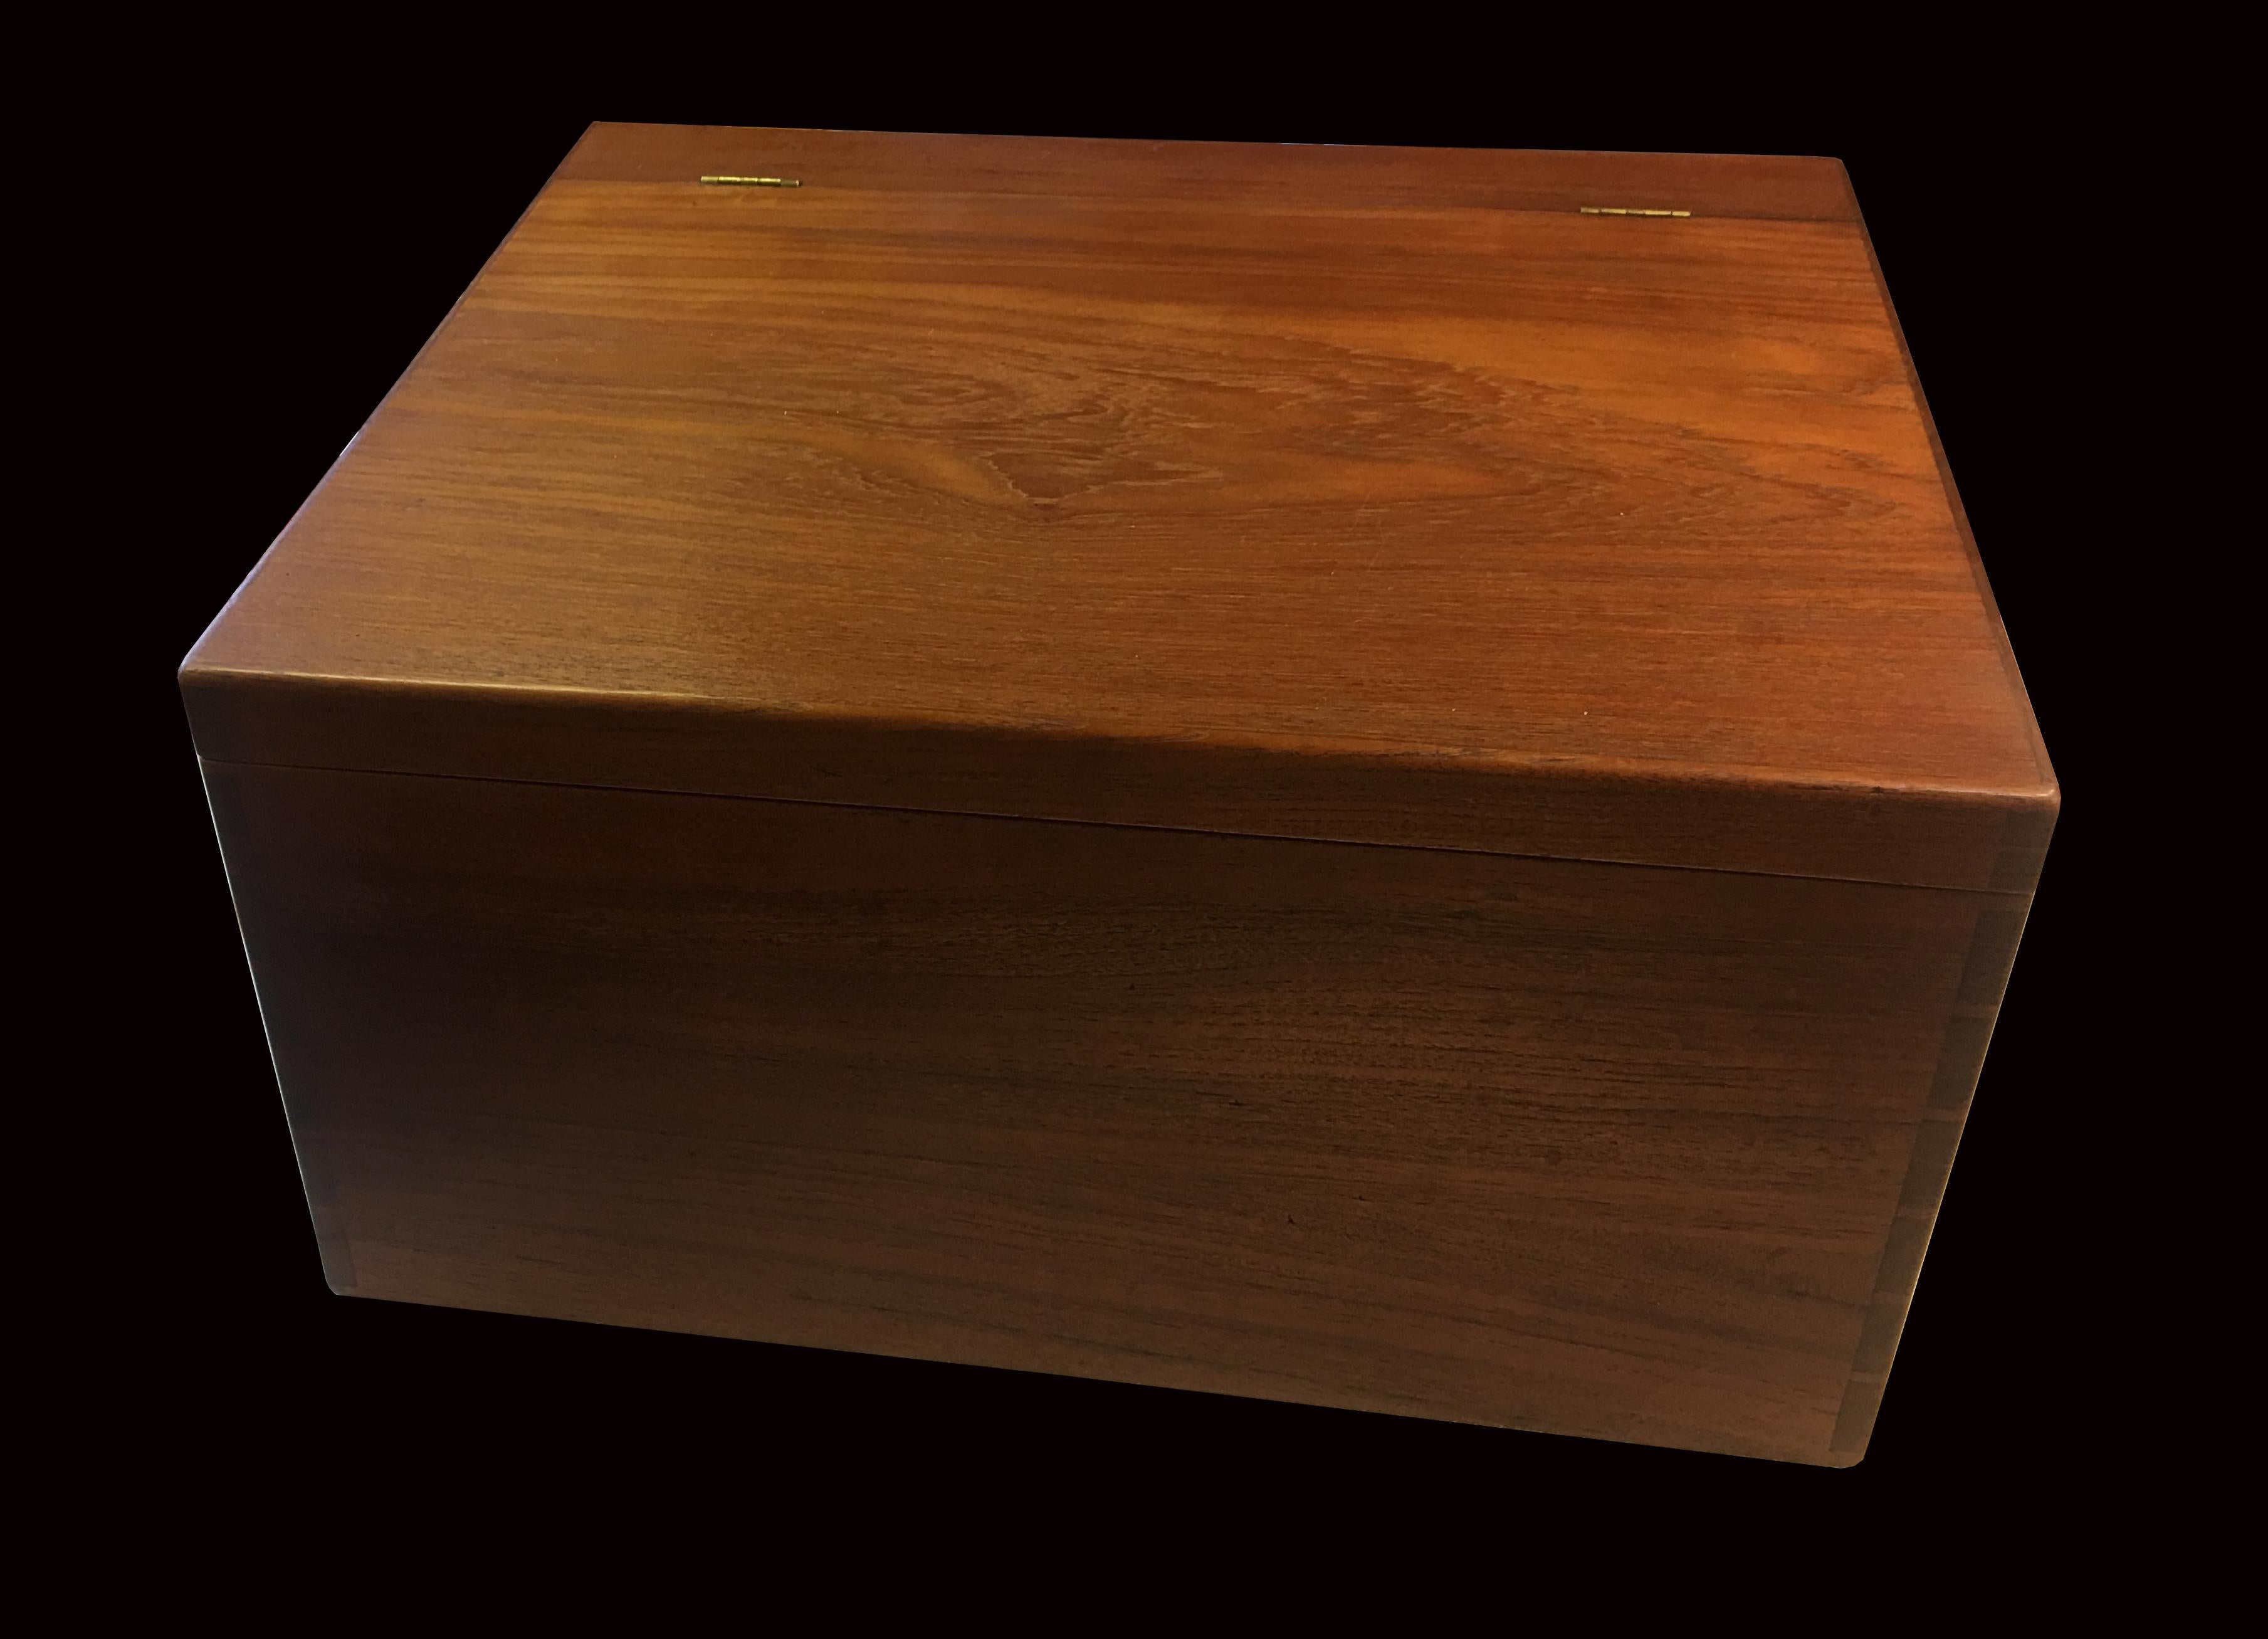 A very nicely made teak box with dovetailed sides, and with keyhole shaped holes for wall mounting in the back, and a small circular hole in one bottom corner, possibly for an electrical lead ?, we are not sure of the original use, but it's an